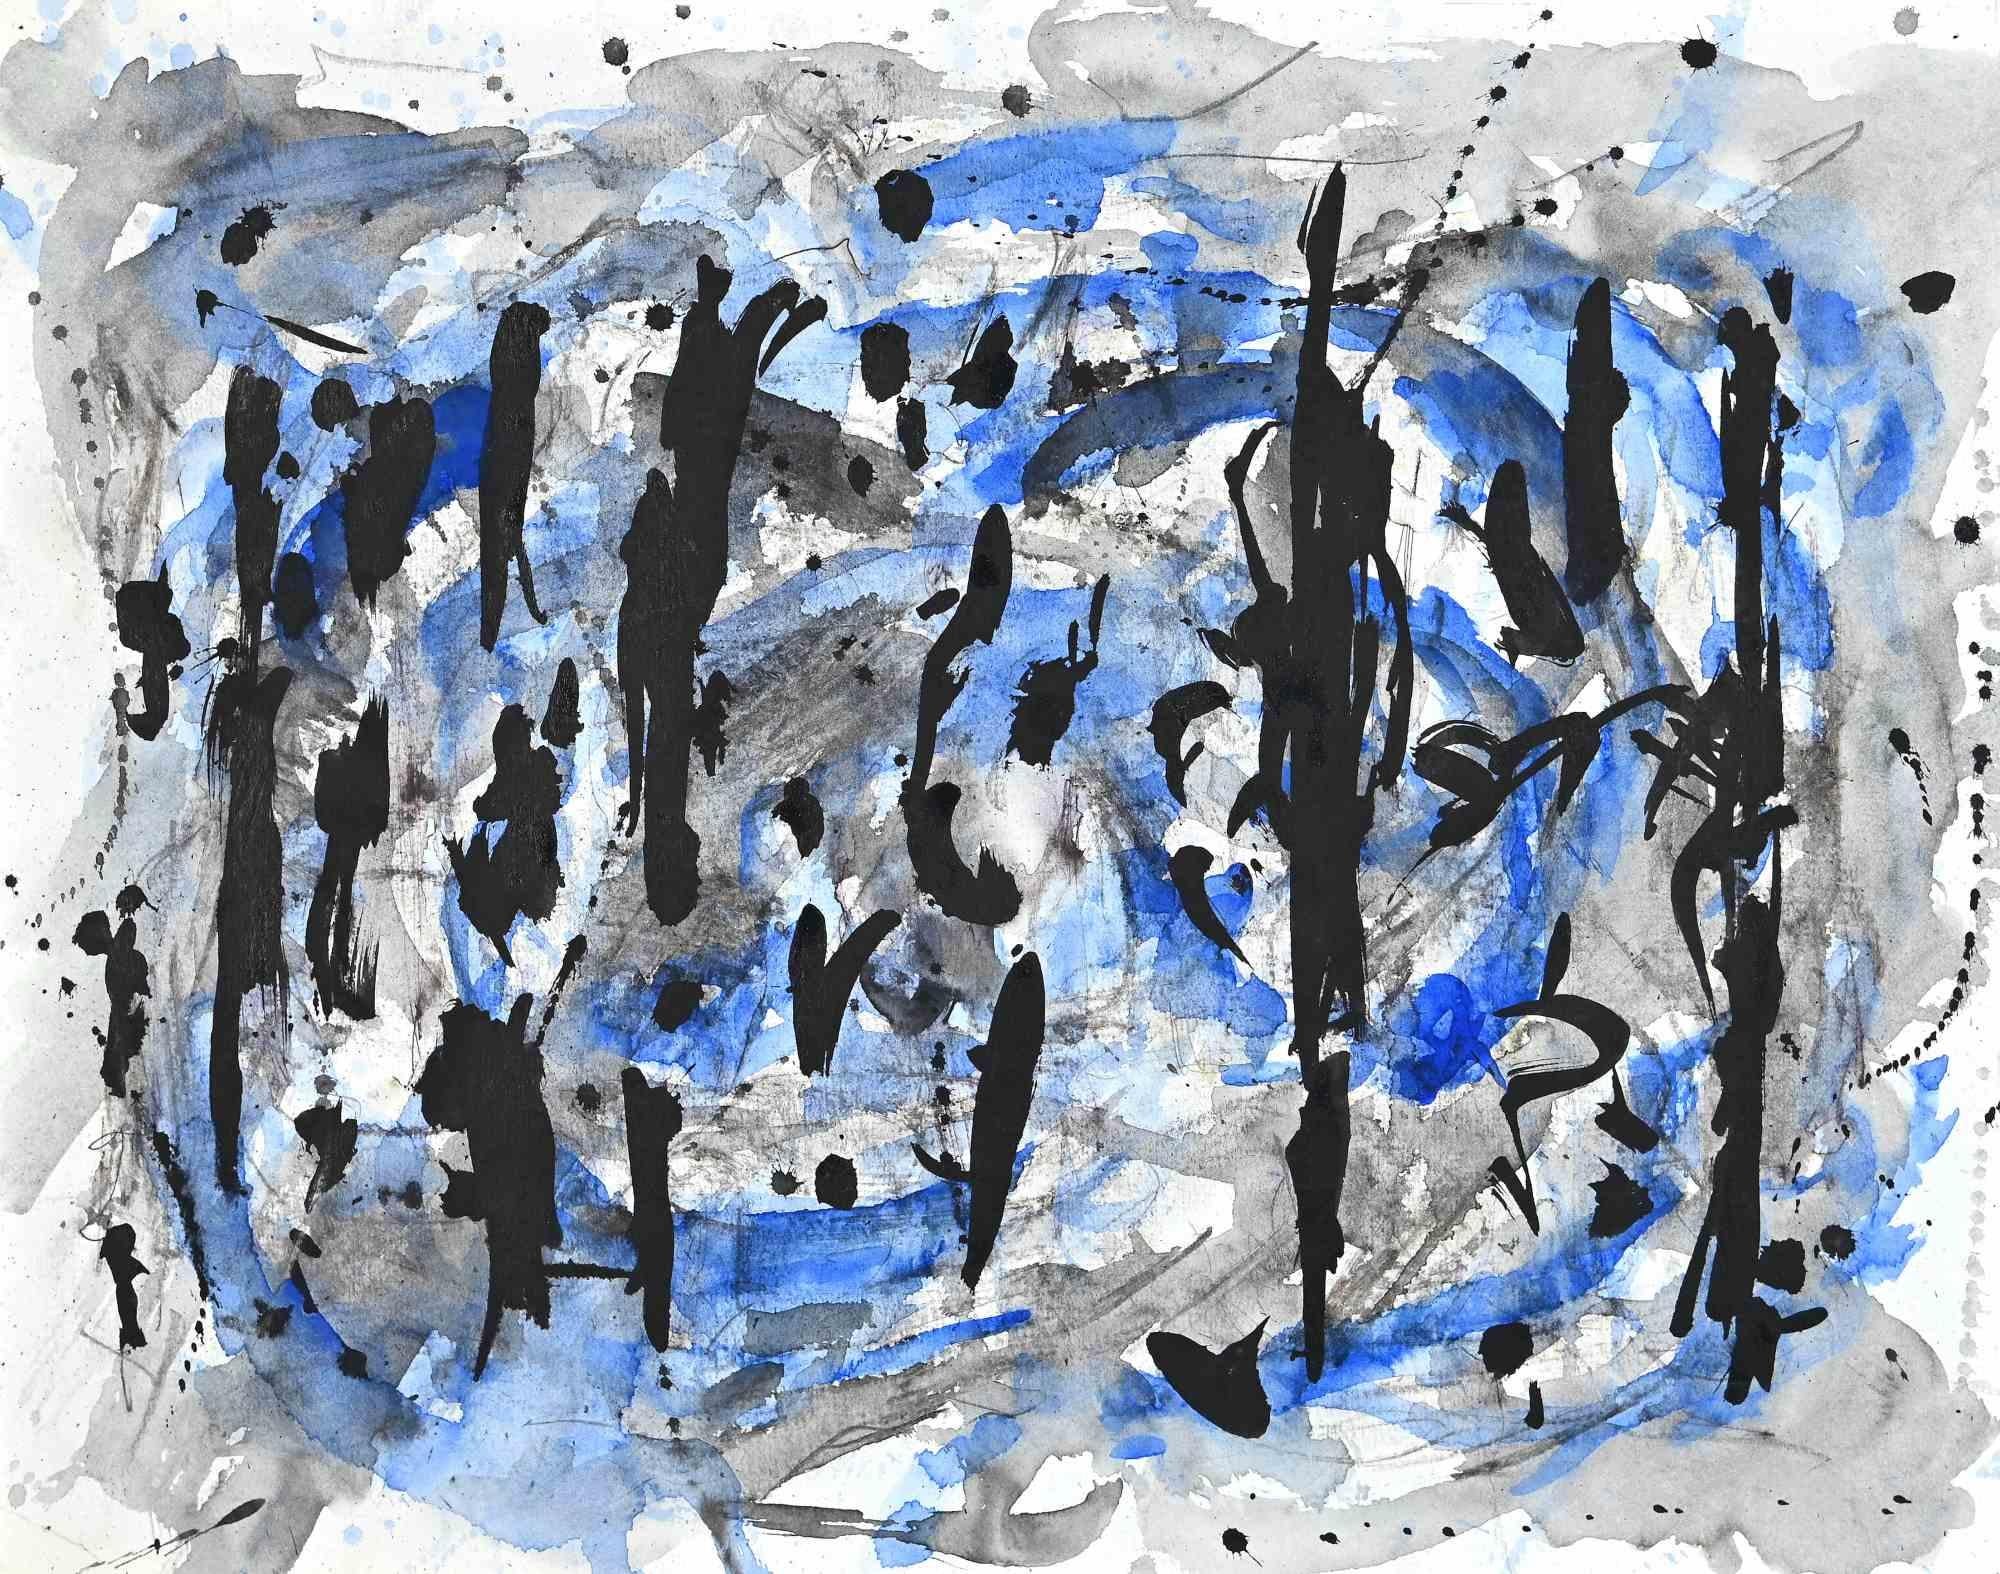 Abstract Composition is an Original drawing in ink and watercolor realized in 1996 Century by Stefano Alberici.

Good conditions.

The artwork is depicted through soft strokes in a well-balanced composition.